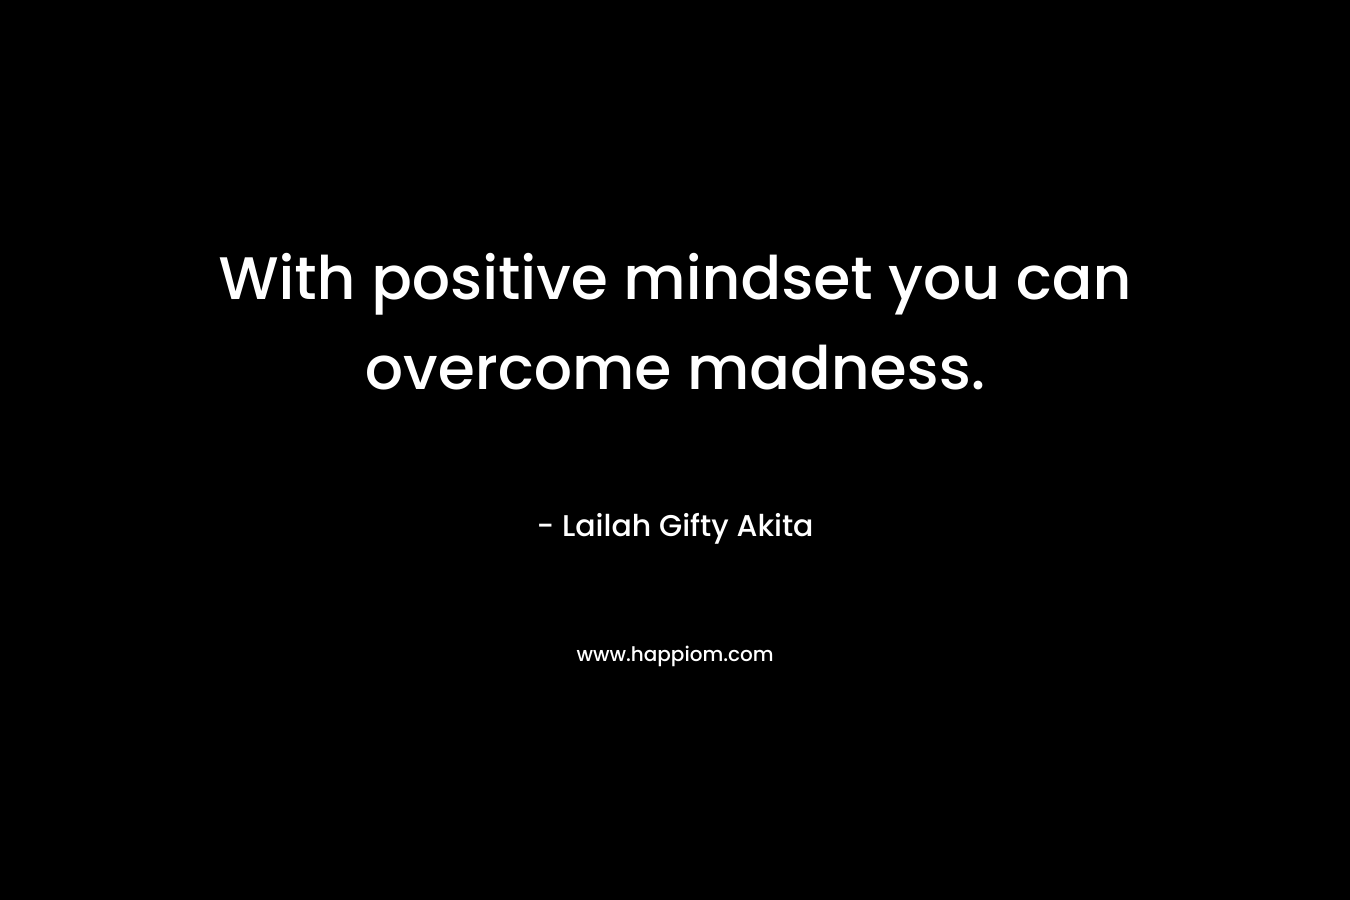 With positive mindset you can overcome madness.